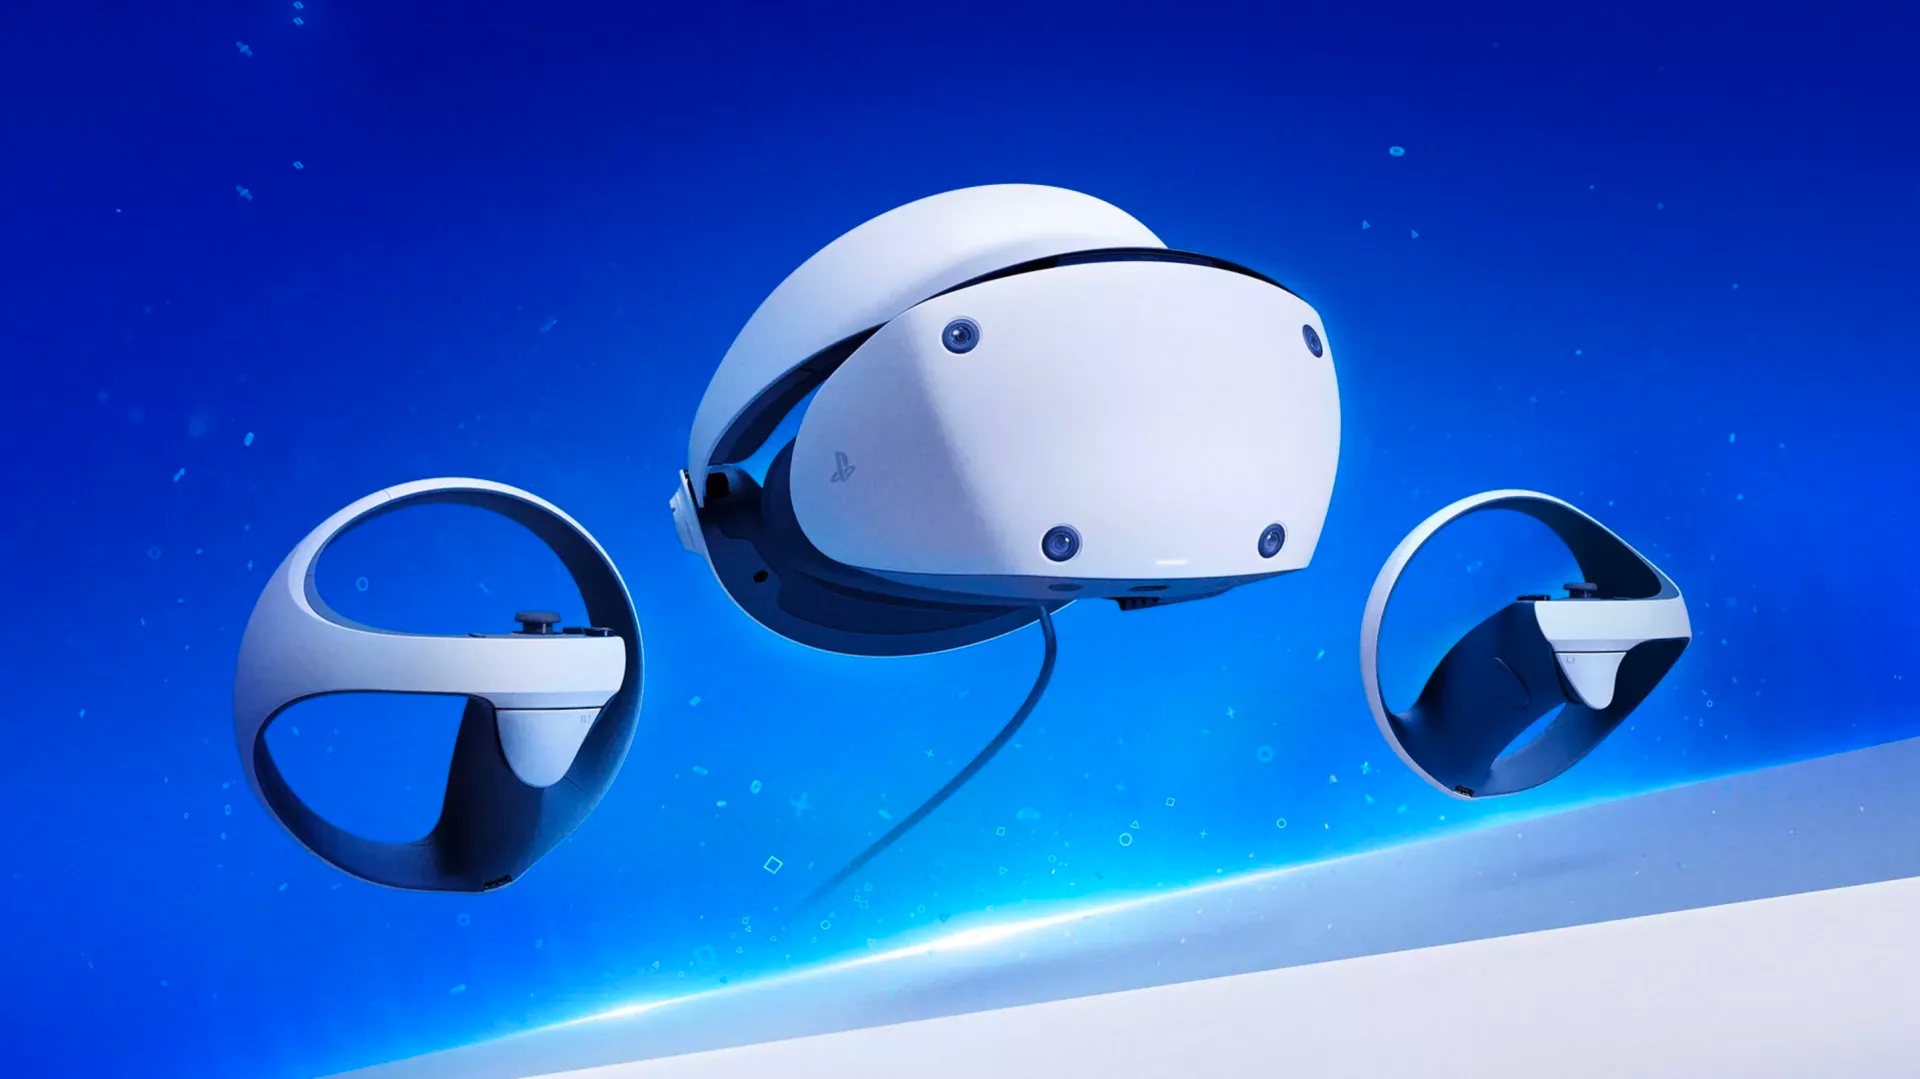 PS VR games, The best PS VR games out now & upcoming